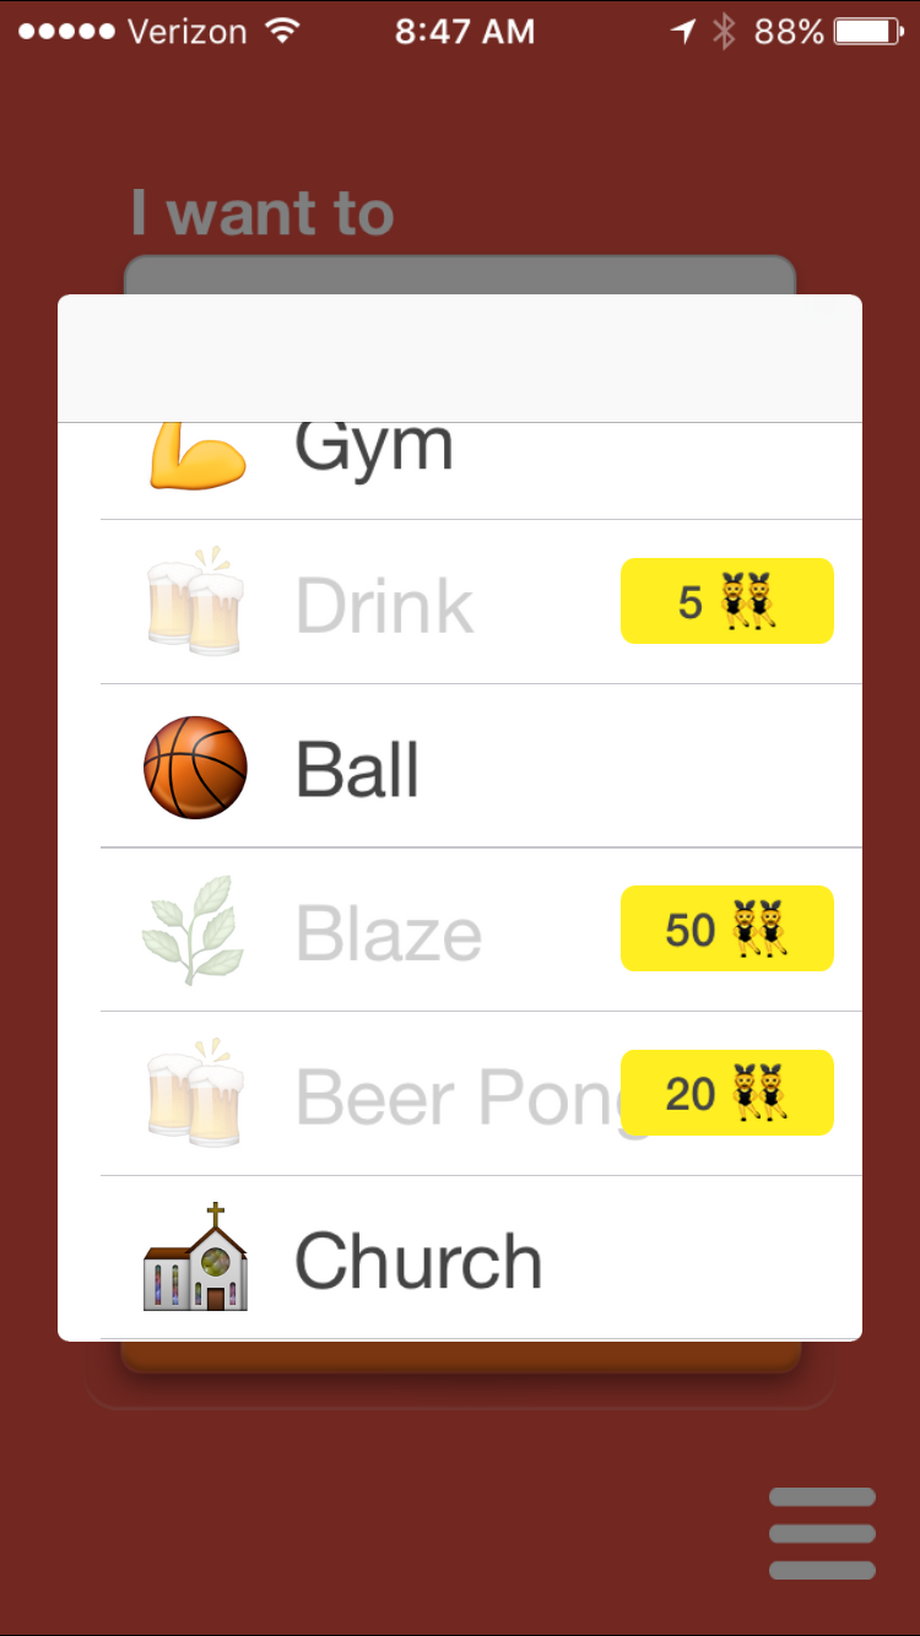 Some activities require you to invite more friends on the app if you want to unlock them, like beer pong (20 people).